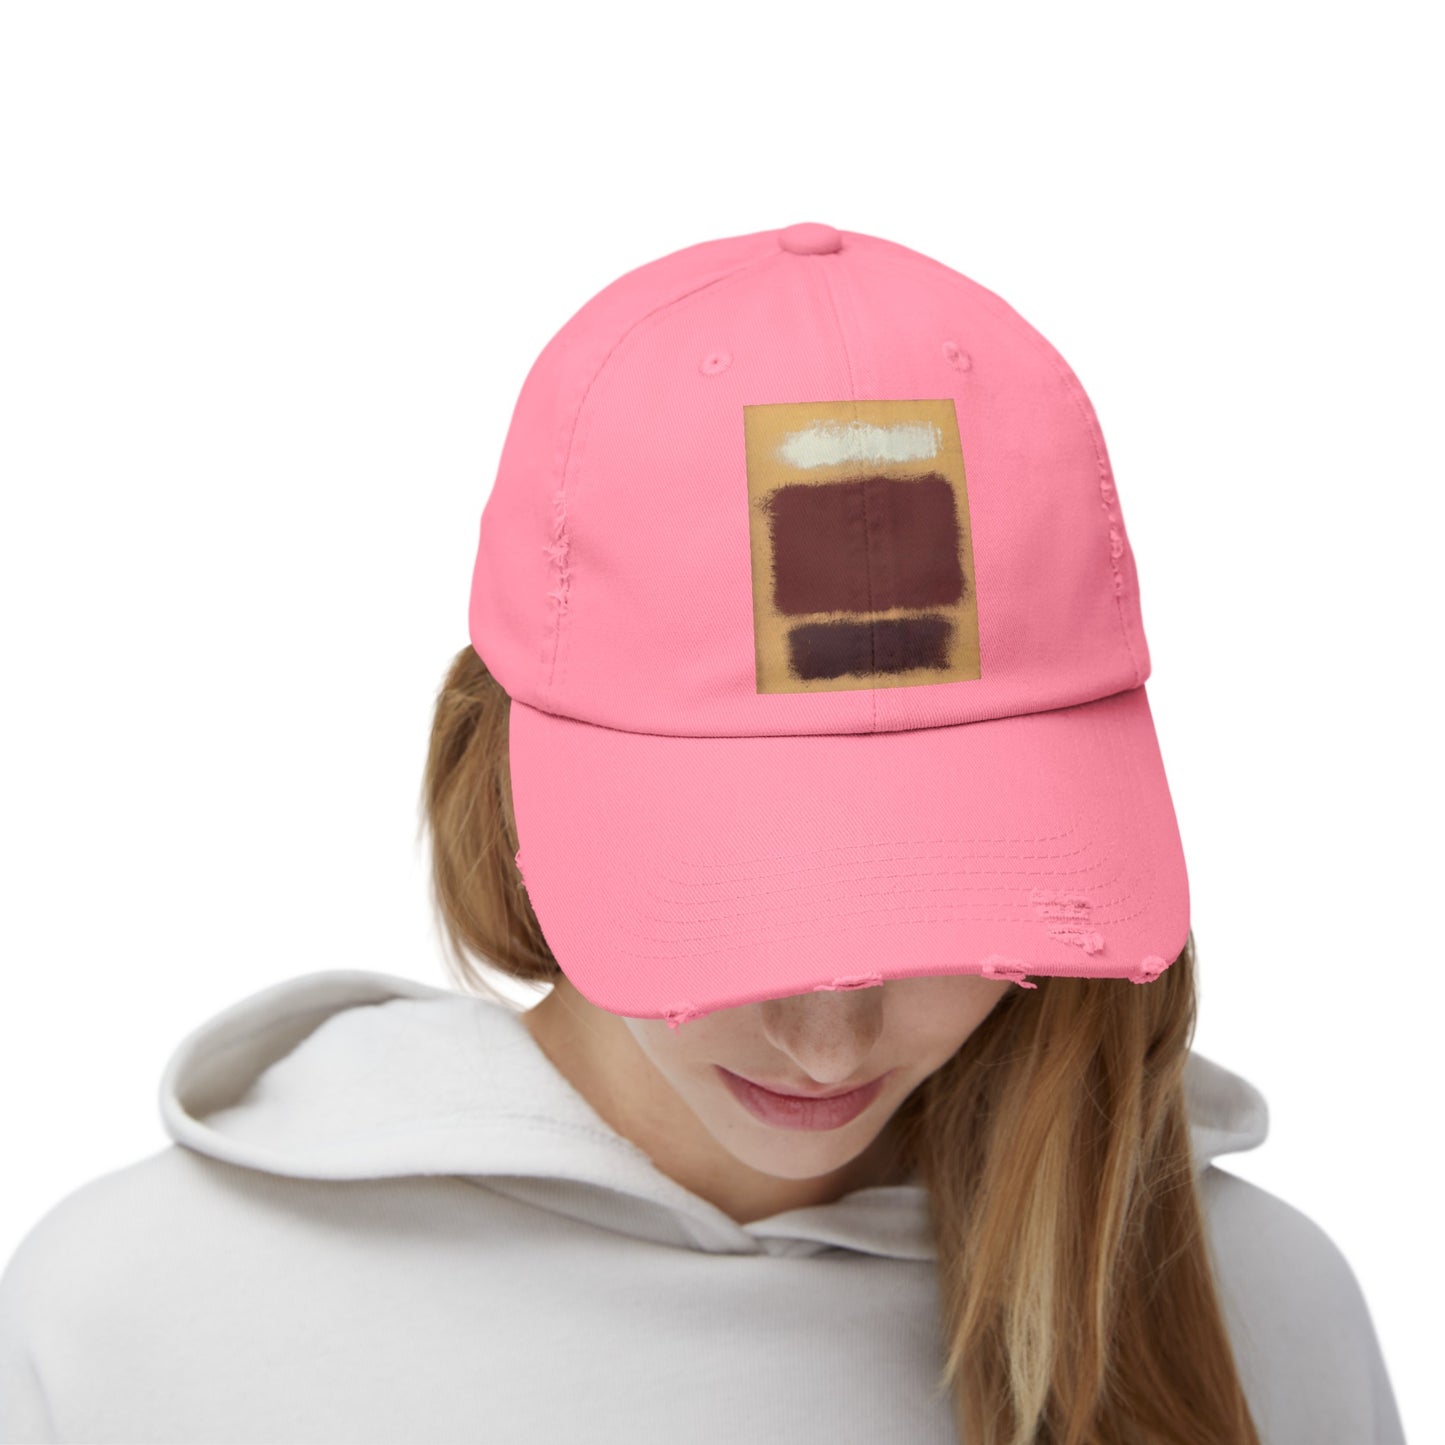 a woman wearing a pink hat with a patch on it